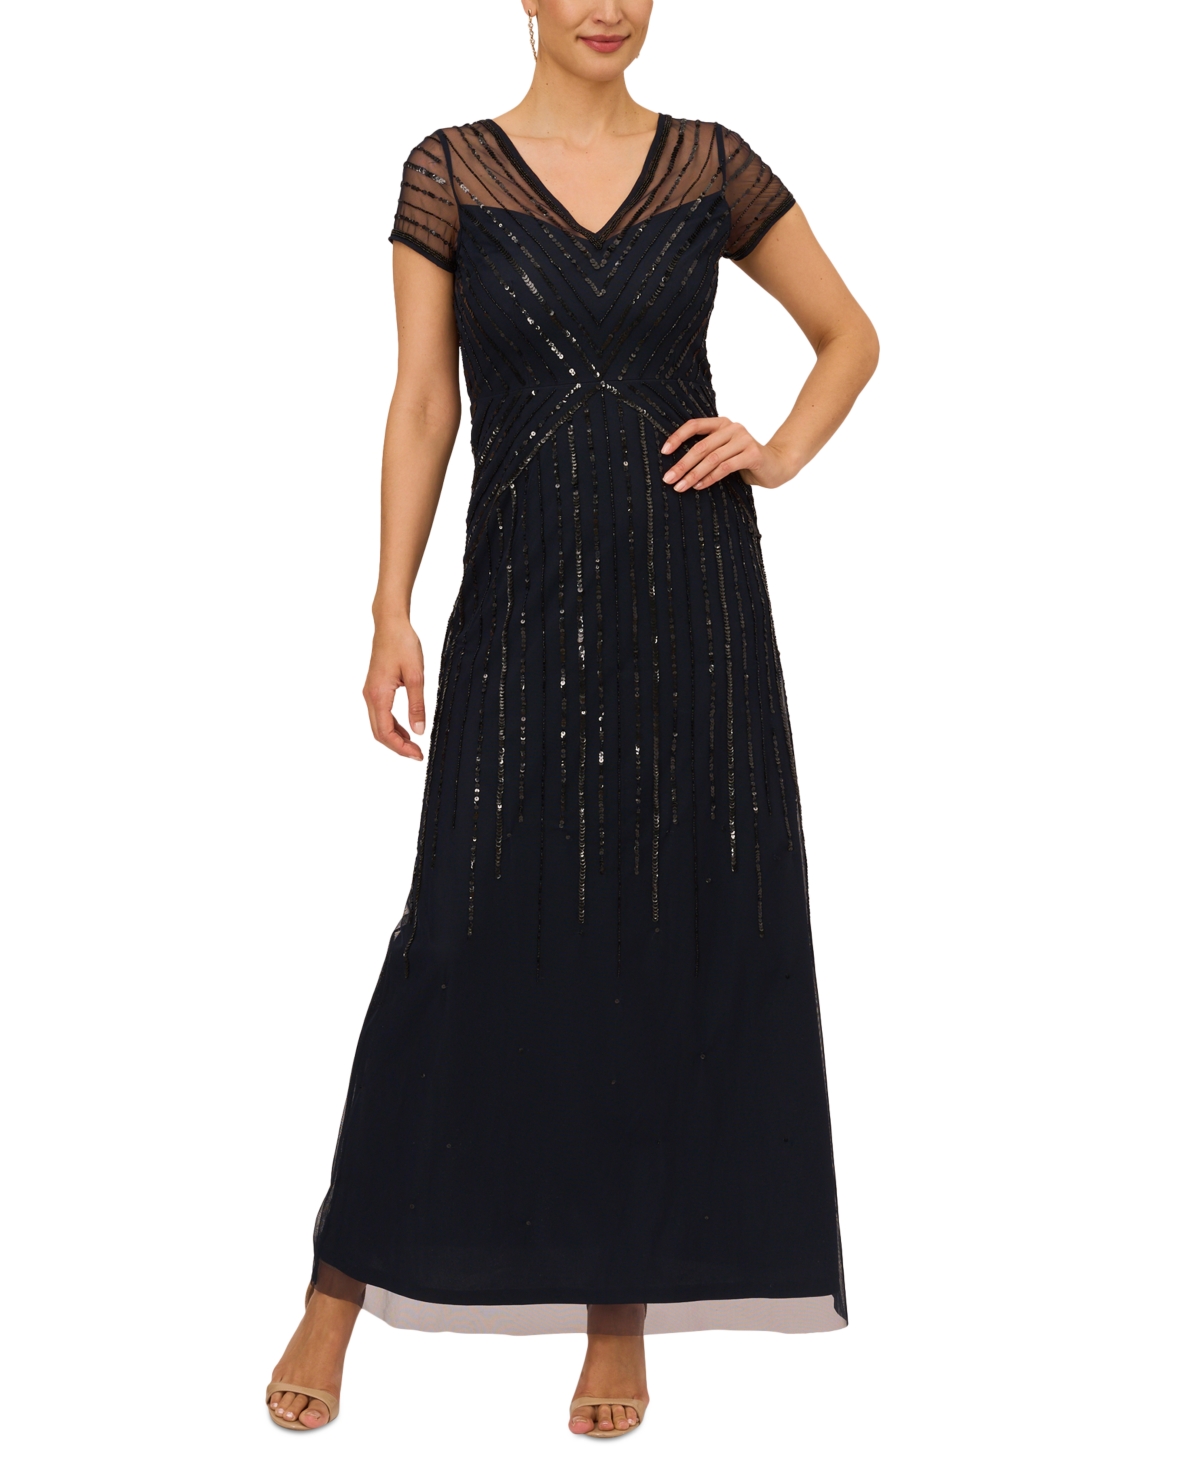 1920s Style Dresses, 1920s Dress Fashions You Will Love Papell Studio Womens V-Neck Short-Sleeve Sequin Gown - MidnightBlack $159.00 AT vintagedancer.com